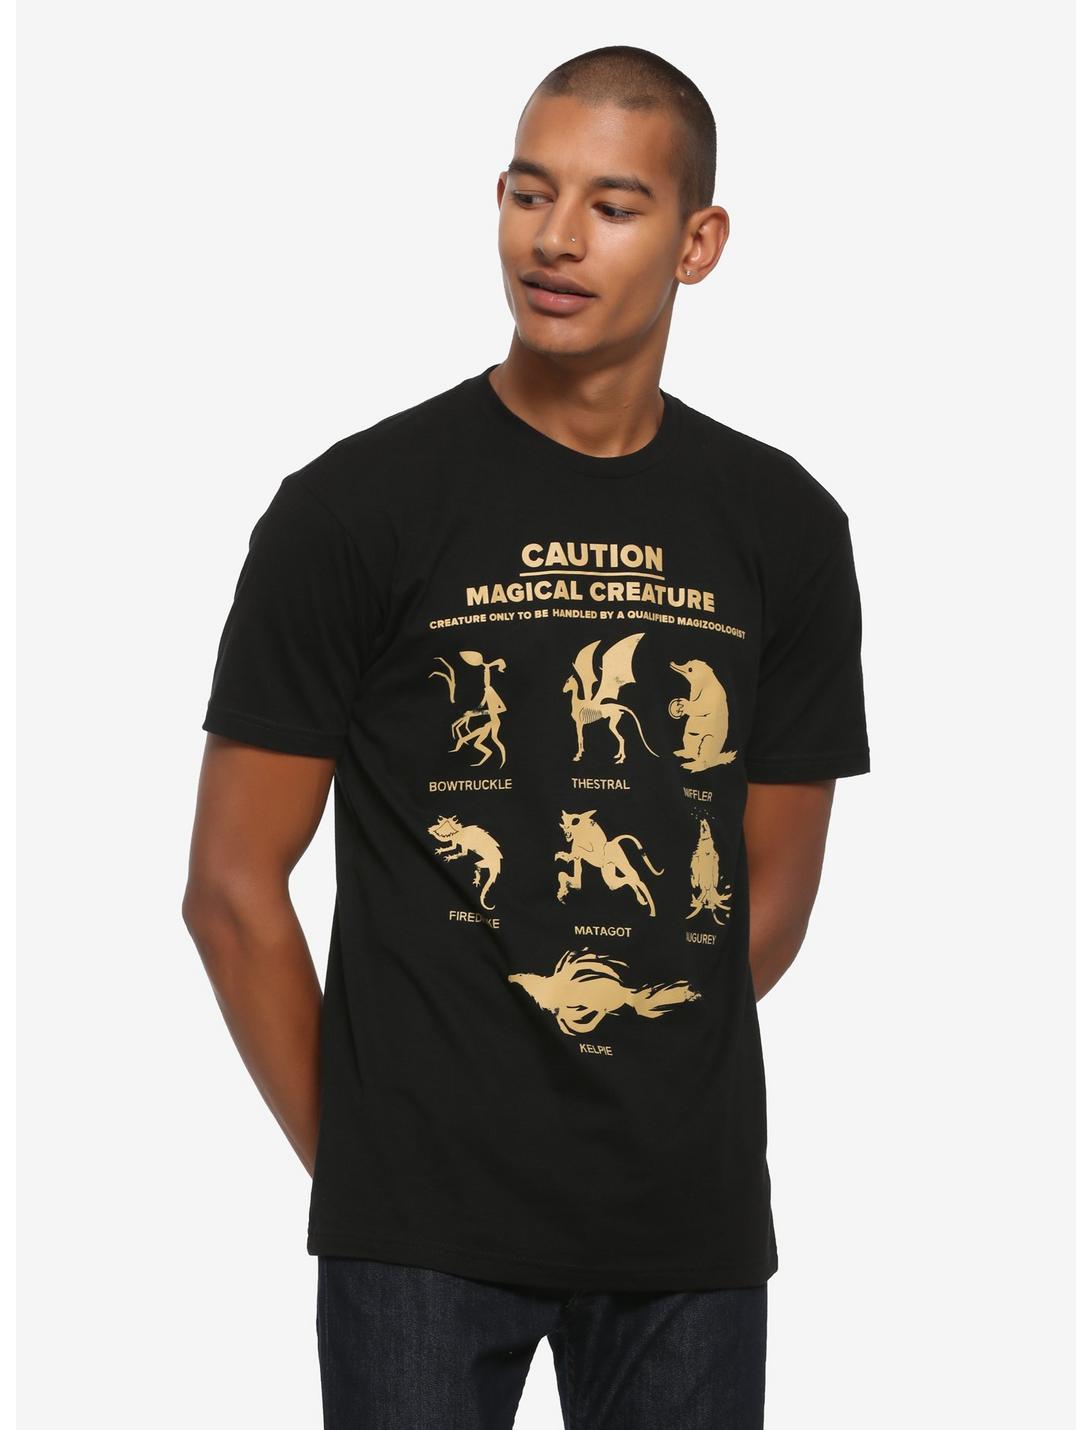 Fantastic Beasts: The Crimes of Grindelwald Caution Magical Creature T-Shirt - BoxLunch Exclusive, BLACK, hi-res